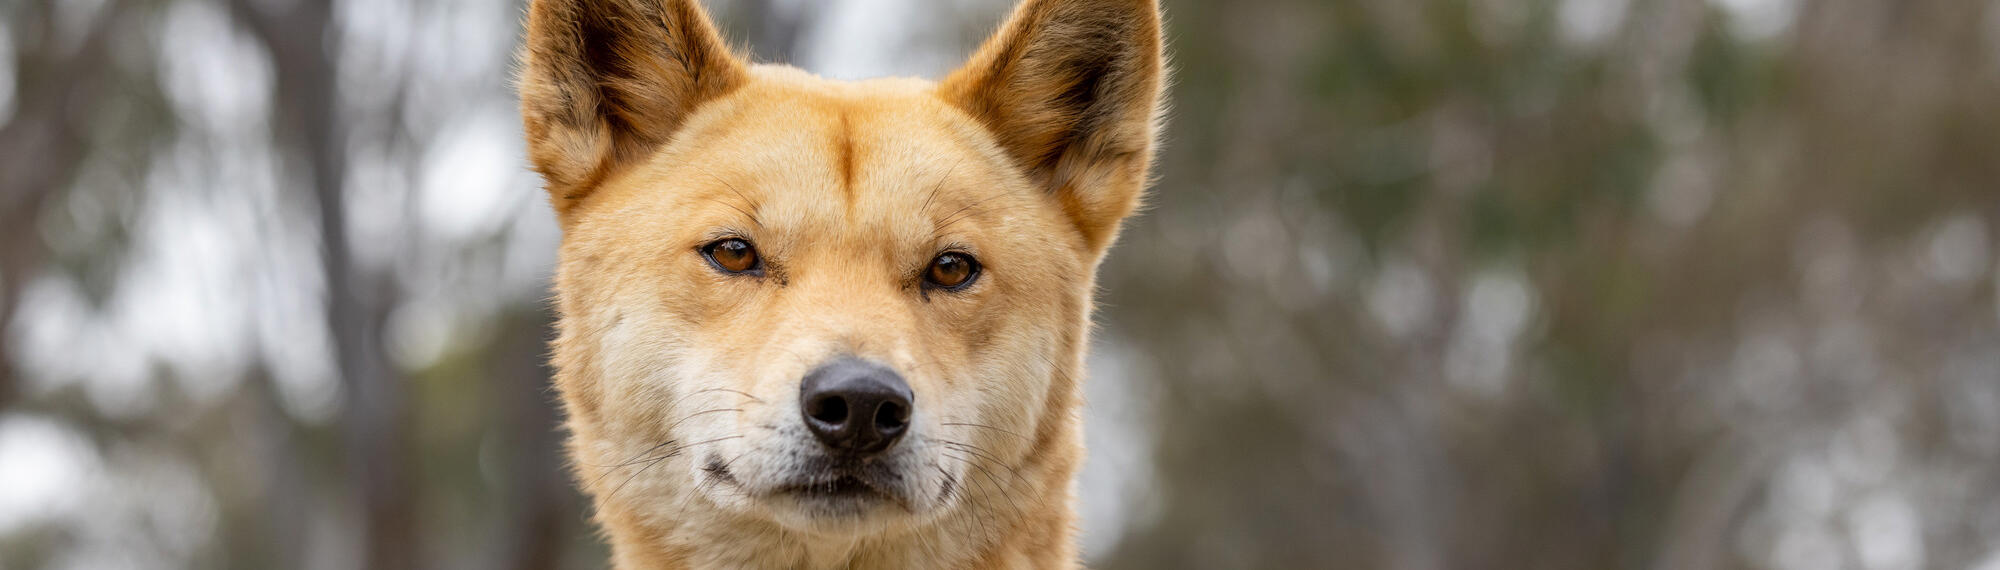 Close up of a dingo head with its orange fur, brown eyes and black nose